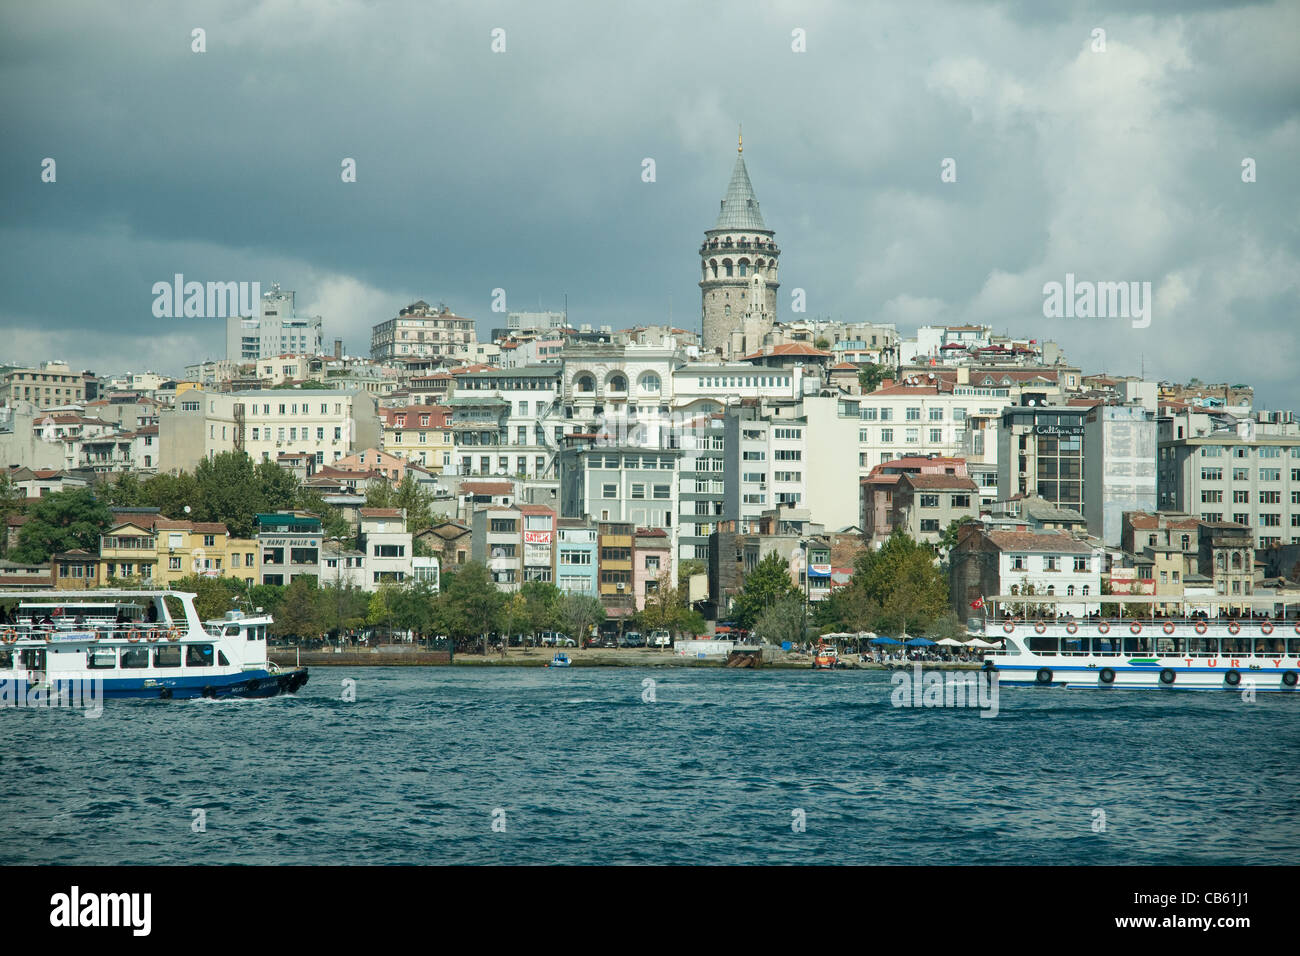 Looking across the Golden Horn waterway to Galata from Istanbul's Eminonu square Stock Photo